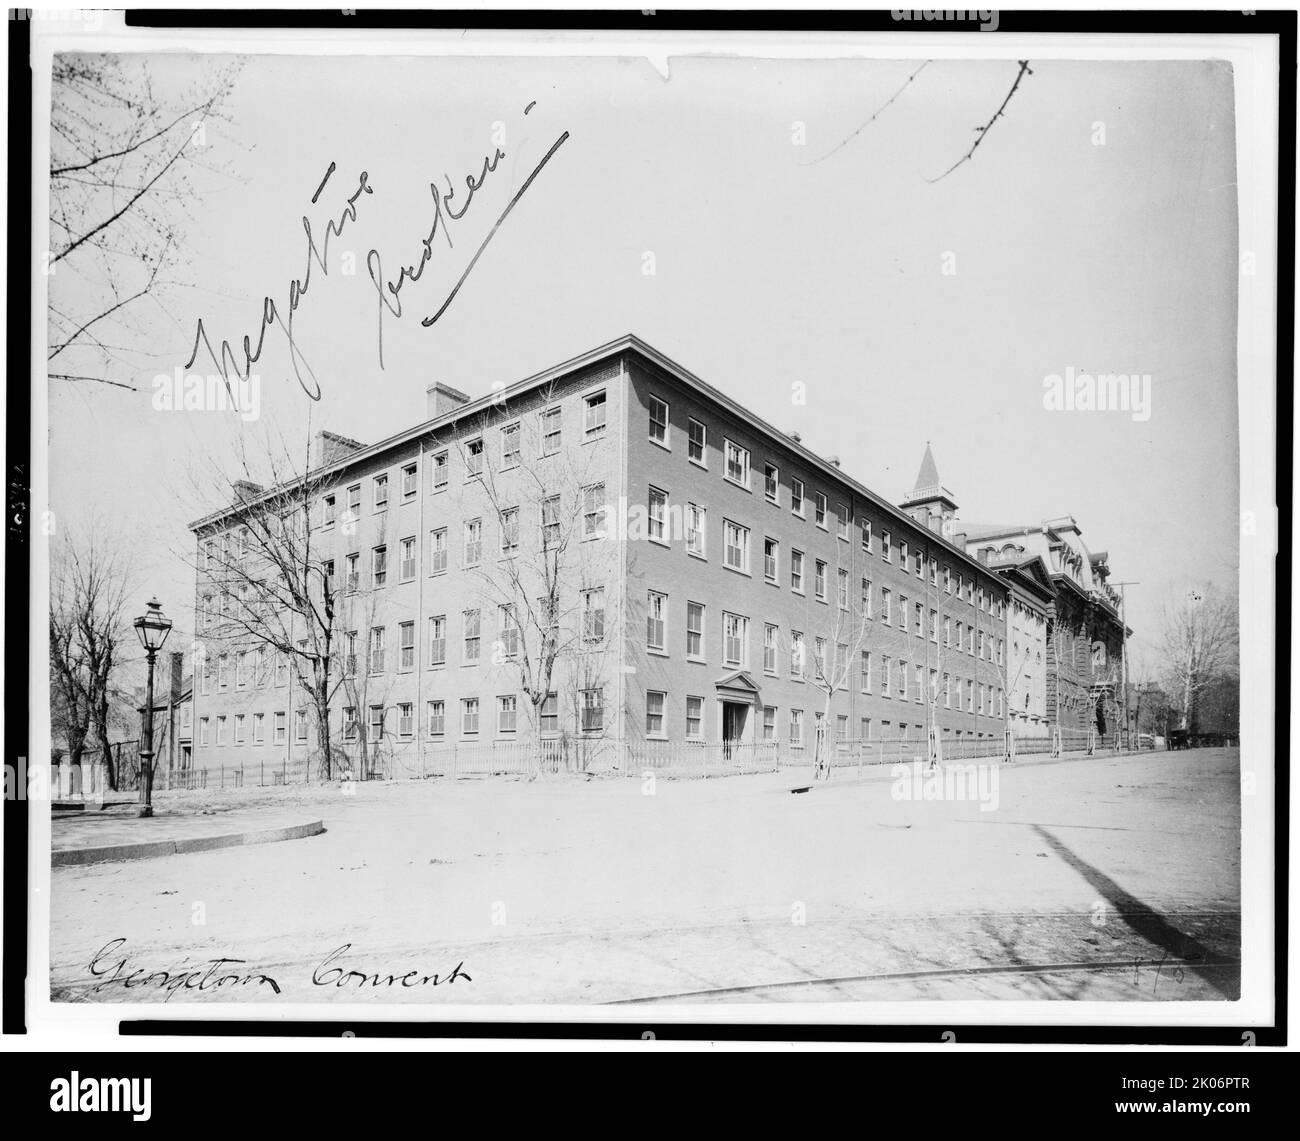 Exterior view of Georgetown Visitation Preparatory School, Washington, D.C., between 1890 and 1910(?). [Roman Catholic school for girls, founded in 1799]. Stock Photo